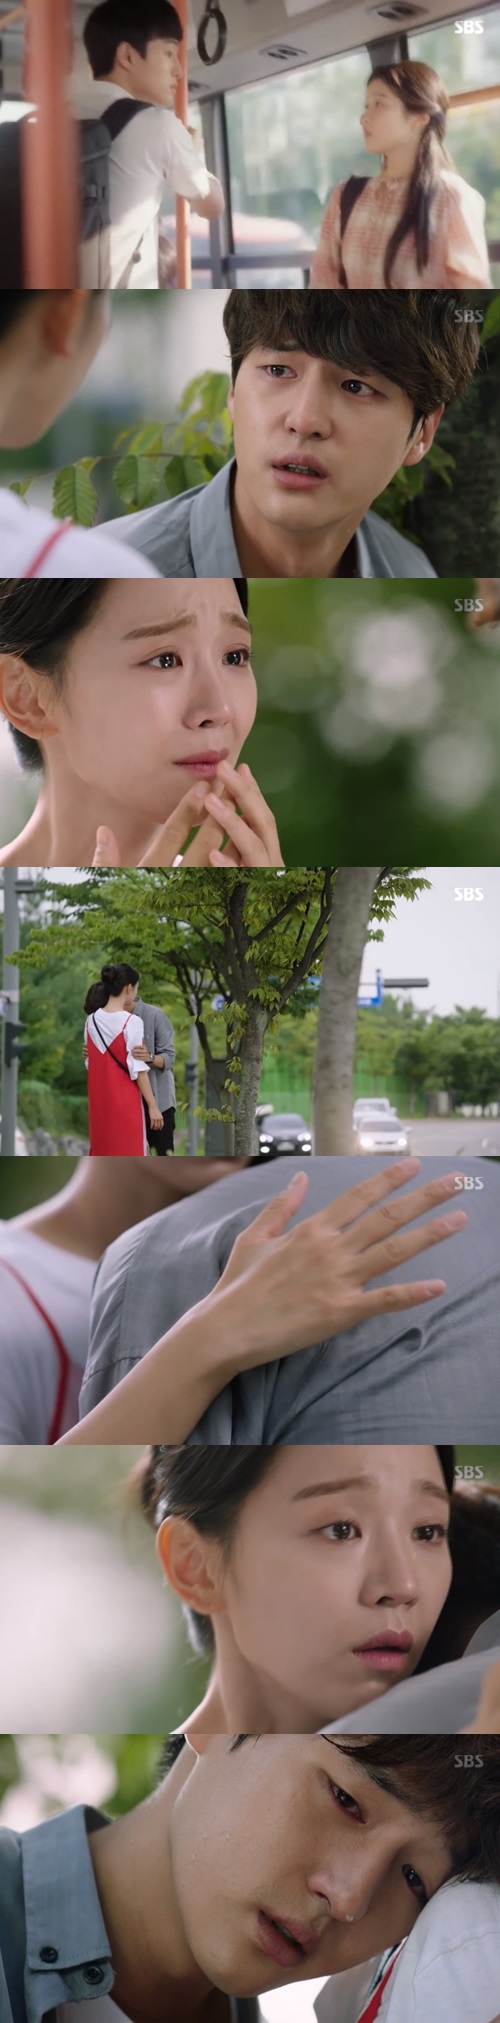 Yang Se-jong wept in the arms of Shin Hye-sun because of the traumaIn the 19-20th episode of SBSs monthly drama Thirty but Seventeen, which aired on August 28, Gong Woo-jin (Yang Se-jong) was once again troubled by the trauma.Wu Seo-ri (Shin Hye-sun) and Gong Woo-jin were left alone for a night while Jennifer (Ye Ji-won) was on vacation, and Yoo Chan (Ahn Hyo-seop) fainted while eating differently from usual because Useo-ris extraordinary relationship with his uncle Gong Woo-jin was concerned.Gong Woo-jin ran to the phone when he was trying to eat with Usari with the winning Tteokbokki coupon and received a call saying that Yuchan fell down.Gong Woo-jin changed the juice directly like Yu-chan was a child, and Yu-chan was more worried about U-su-ri, saying, Did you leave your aunt alone in this ugly world?Yuchan tried to doubt the suspicion between Gong Woo-jin and U-ri, and he was mistaken for himself and sold out to the first place to confess to U-ri again.In the meantime, Uthery found a violin that was finished repairing, and he was offered to play together at the festival by his teacher Shin Myung Hwan, who had a relationship 17 years ago.While Utherly was worried about the proposal, director Lin Kim (Wang Ji-won) said, How can you be such an amateur on the stage of professionals?But Utheri refused to participate in the festival. Utheri thought he was lacking in his skills, and Lin Kim was relieved.But then Utherly changed his mind, saying, I think I want to. And Lin Kim was nervous, and Uthery started playing the violin again, and Gong Woo-jin and Yu-chan cheered on him.Meanwhile, Ussaris maternal aunt, Kook Mi-hyun (Sim Lee-young), called Yu-chan, who saved her son, and spoke to Usseree for a while.However, the two did not understand each others voices, and Kook Mi-hyun asked his son, When will you go to thank your brother for saving you?In addition, a questionable man came to Usseree at a hospital where Usseree had been living for a long time, and although the face of the man was not revealed, he was curious whether his uncle Kim Hyun-gyu (Lee Seung-jun) would finally be revealed.Yoo Gyeong-sang